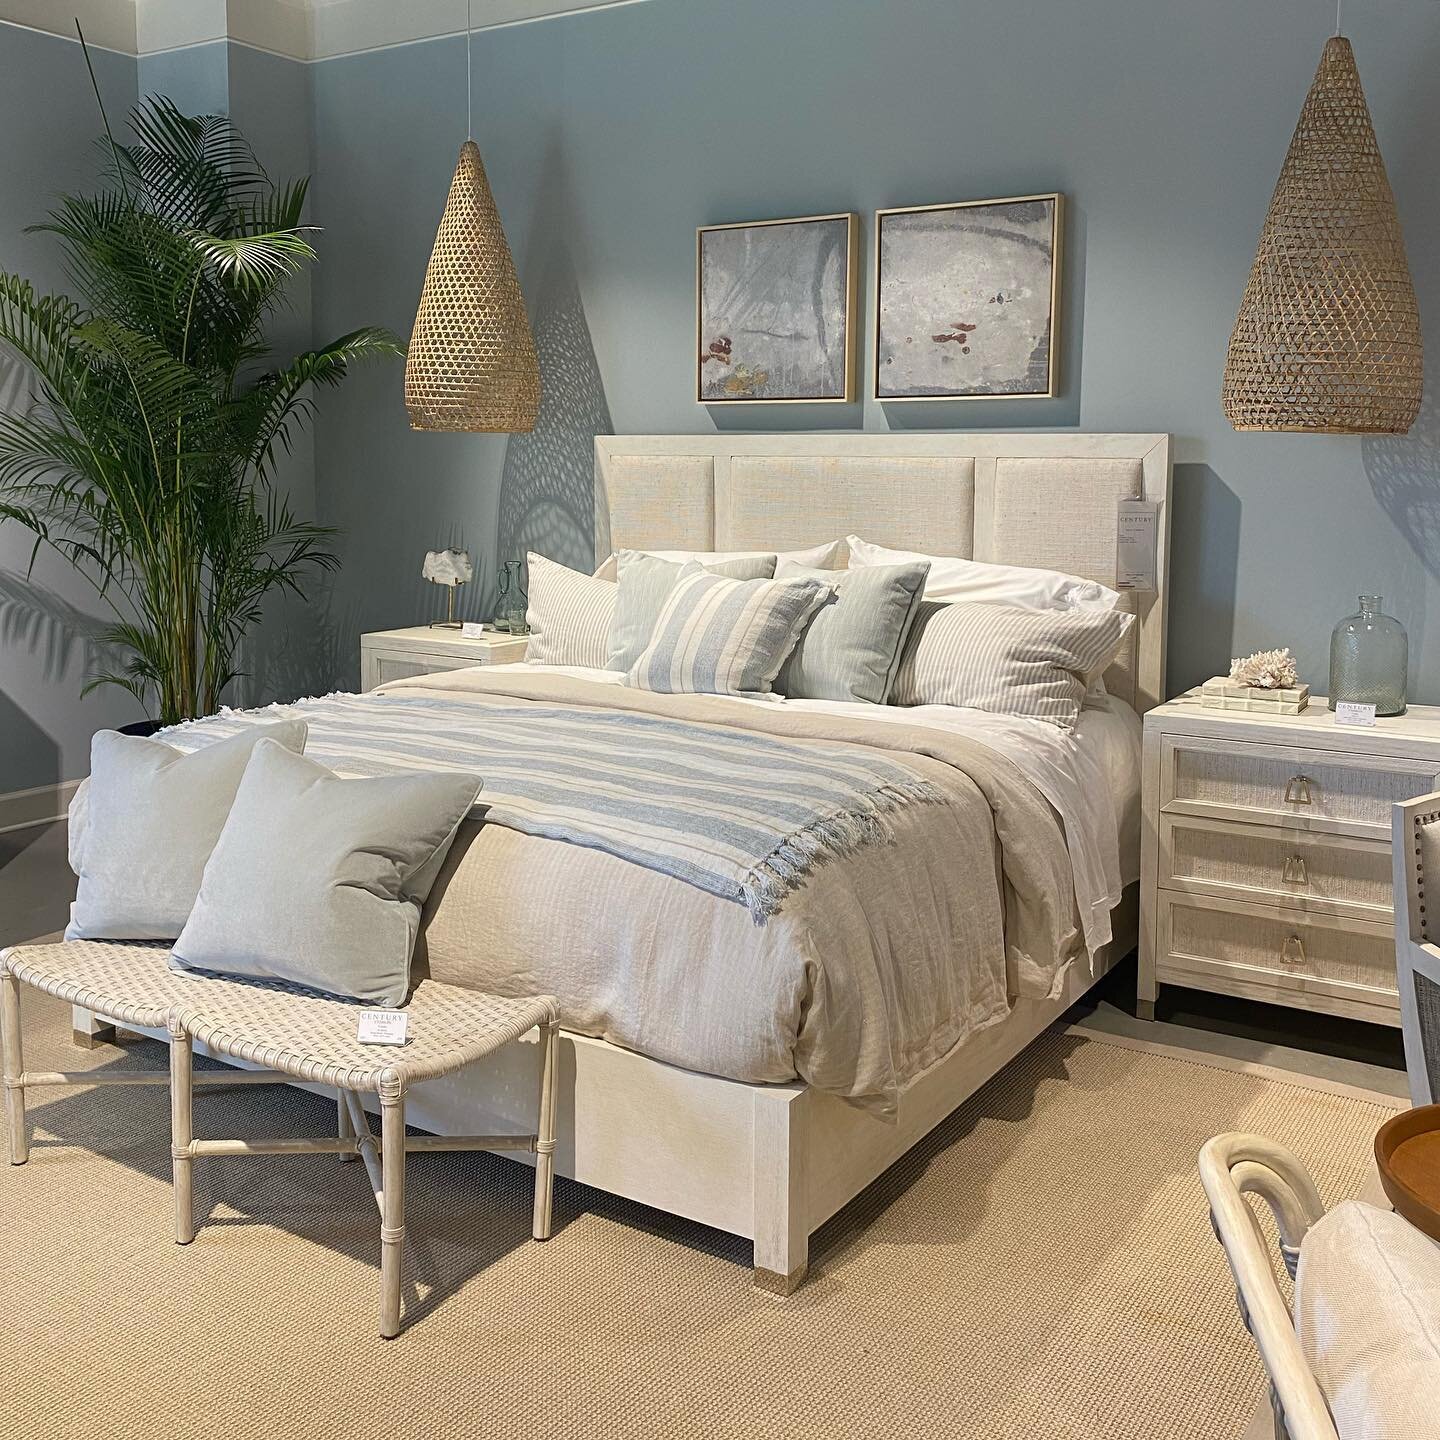 Which bedroom setup is your favorite?✨

All of these bedroom designs were showcased at @highpointmarket this year. Lots of inspiration to choose from!

#bedroomideas #bedroomdesign #interiordesignideas